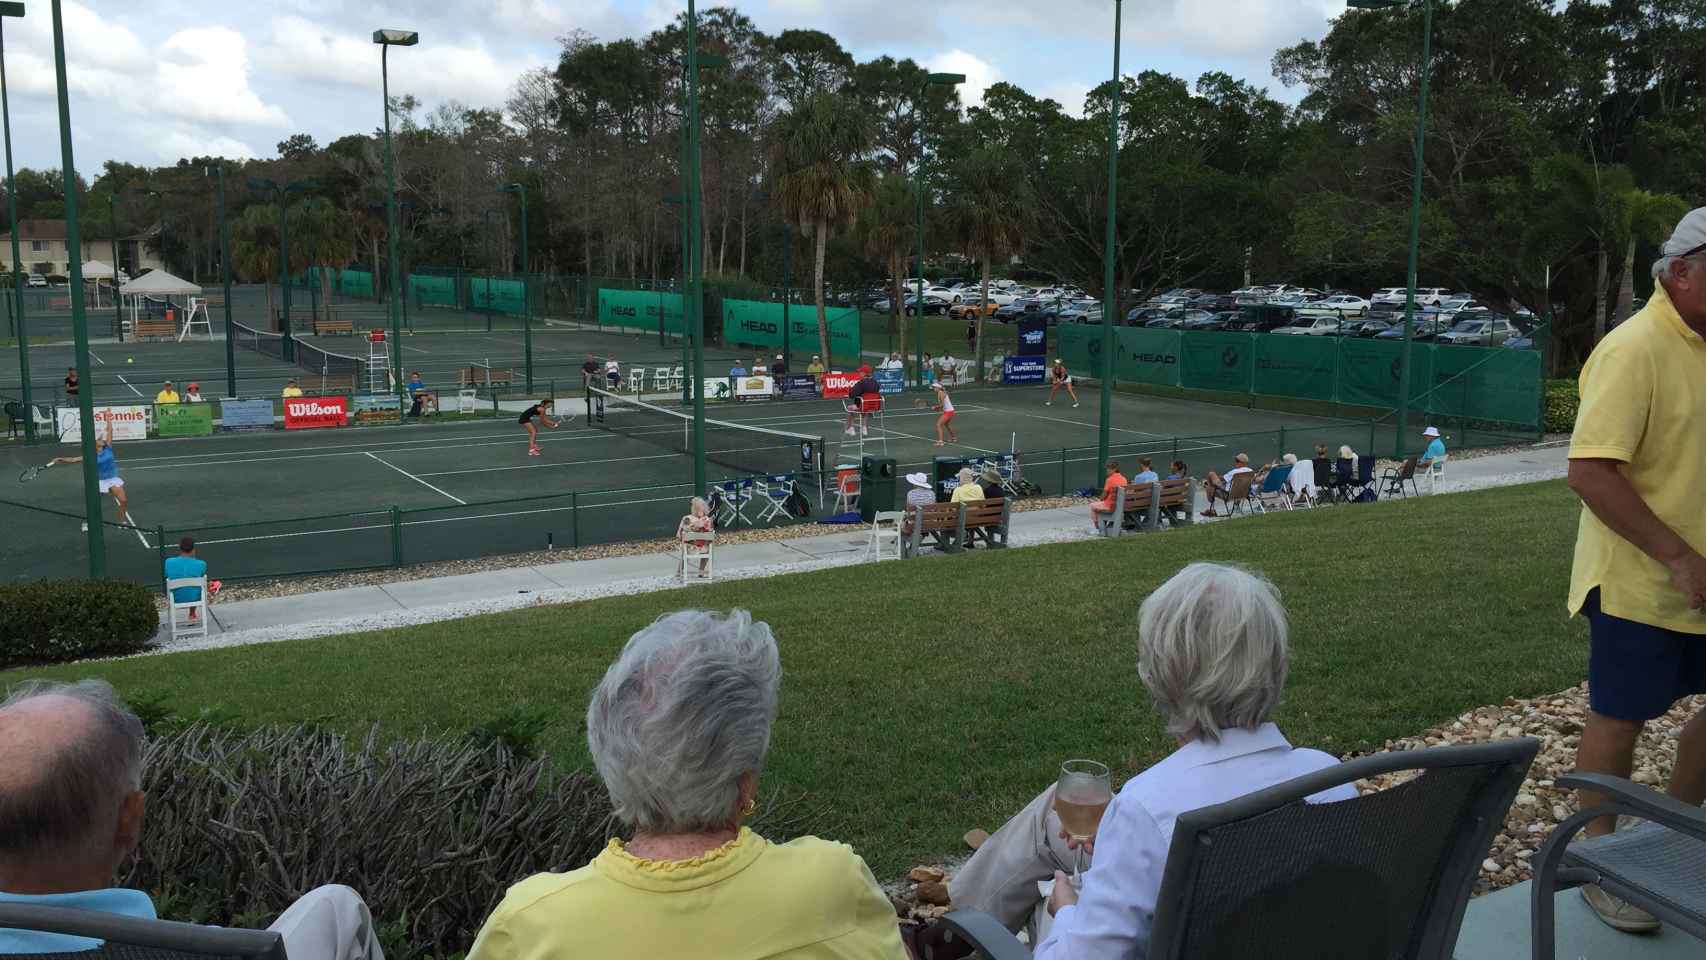 Tennis match at the Sánchez-Casal Academy in Naples, Florida.